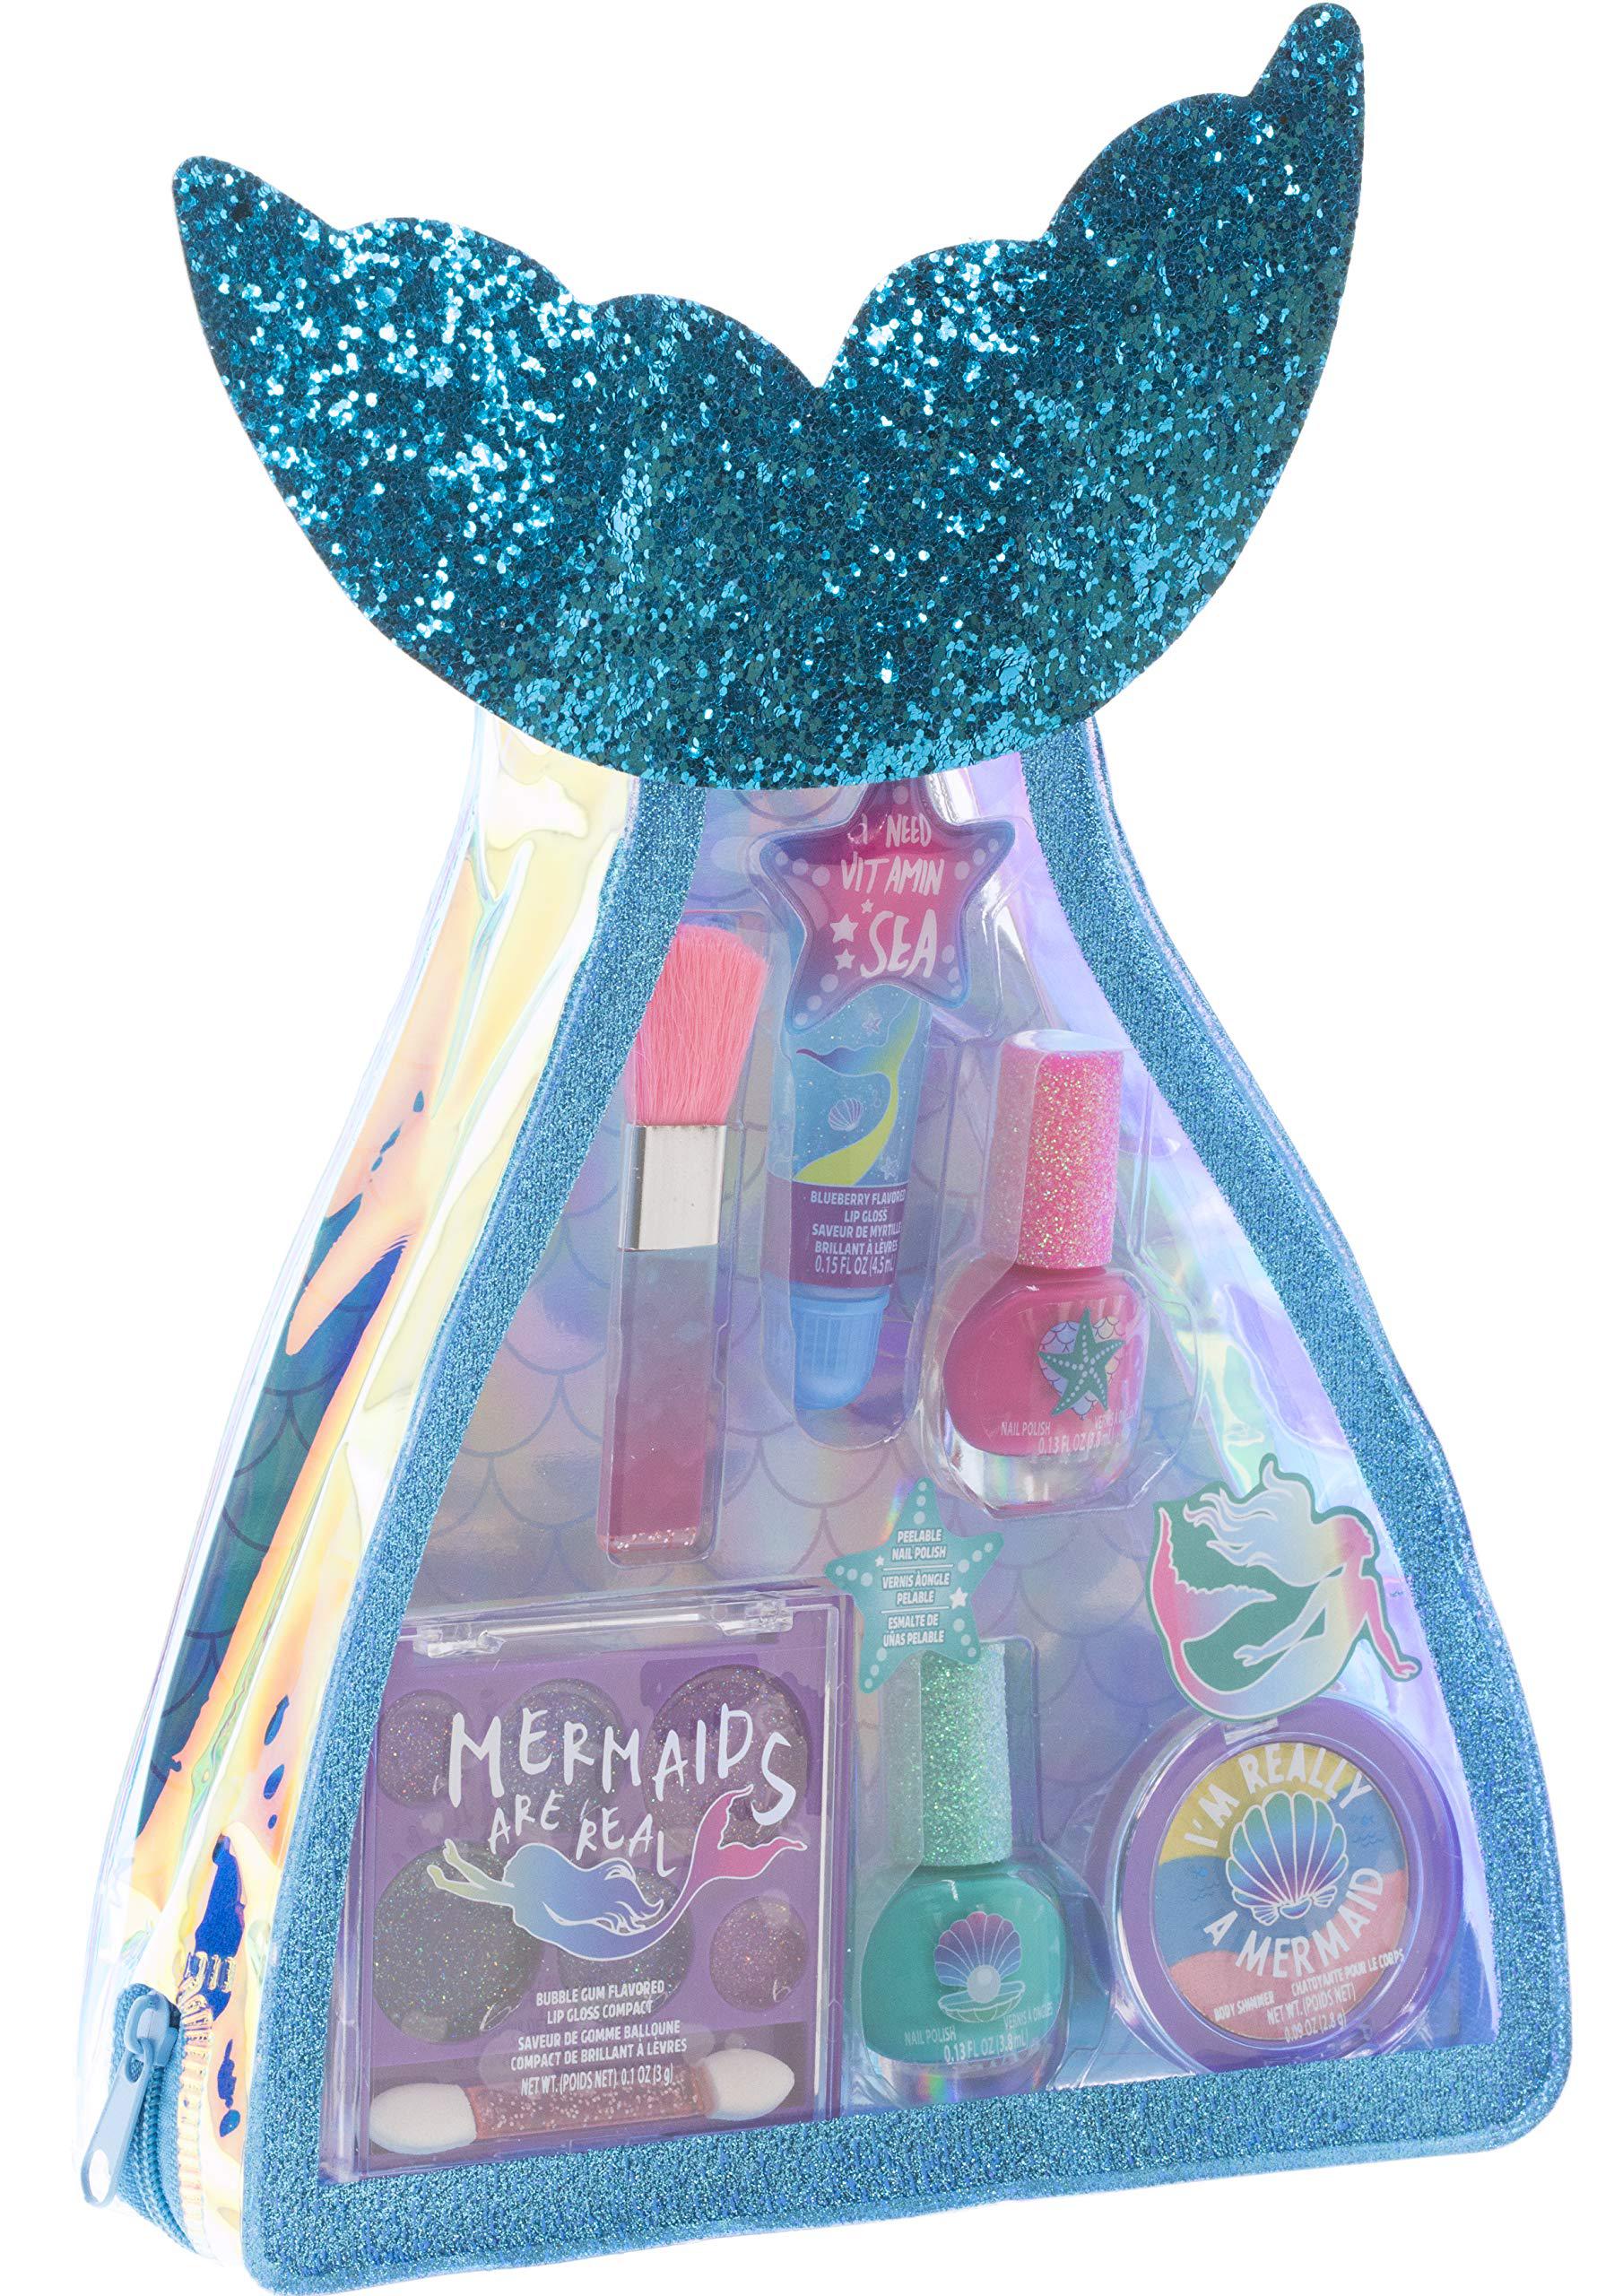 Townley Girl Mermaid Vibes Makeup Set with 8 Pieces, Including Lip Gloss, Nail Polish, Body Shimmer and More in Mermaid Bag, Age